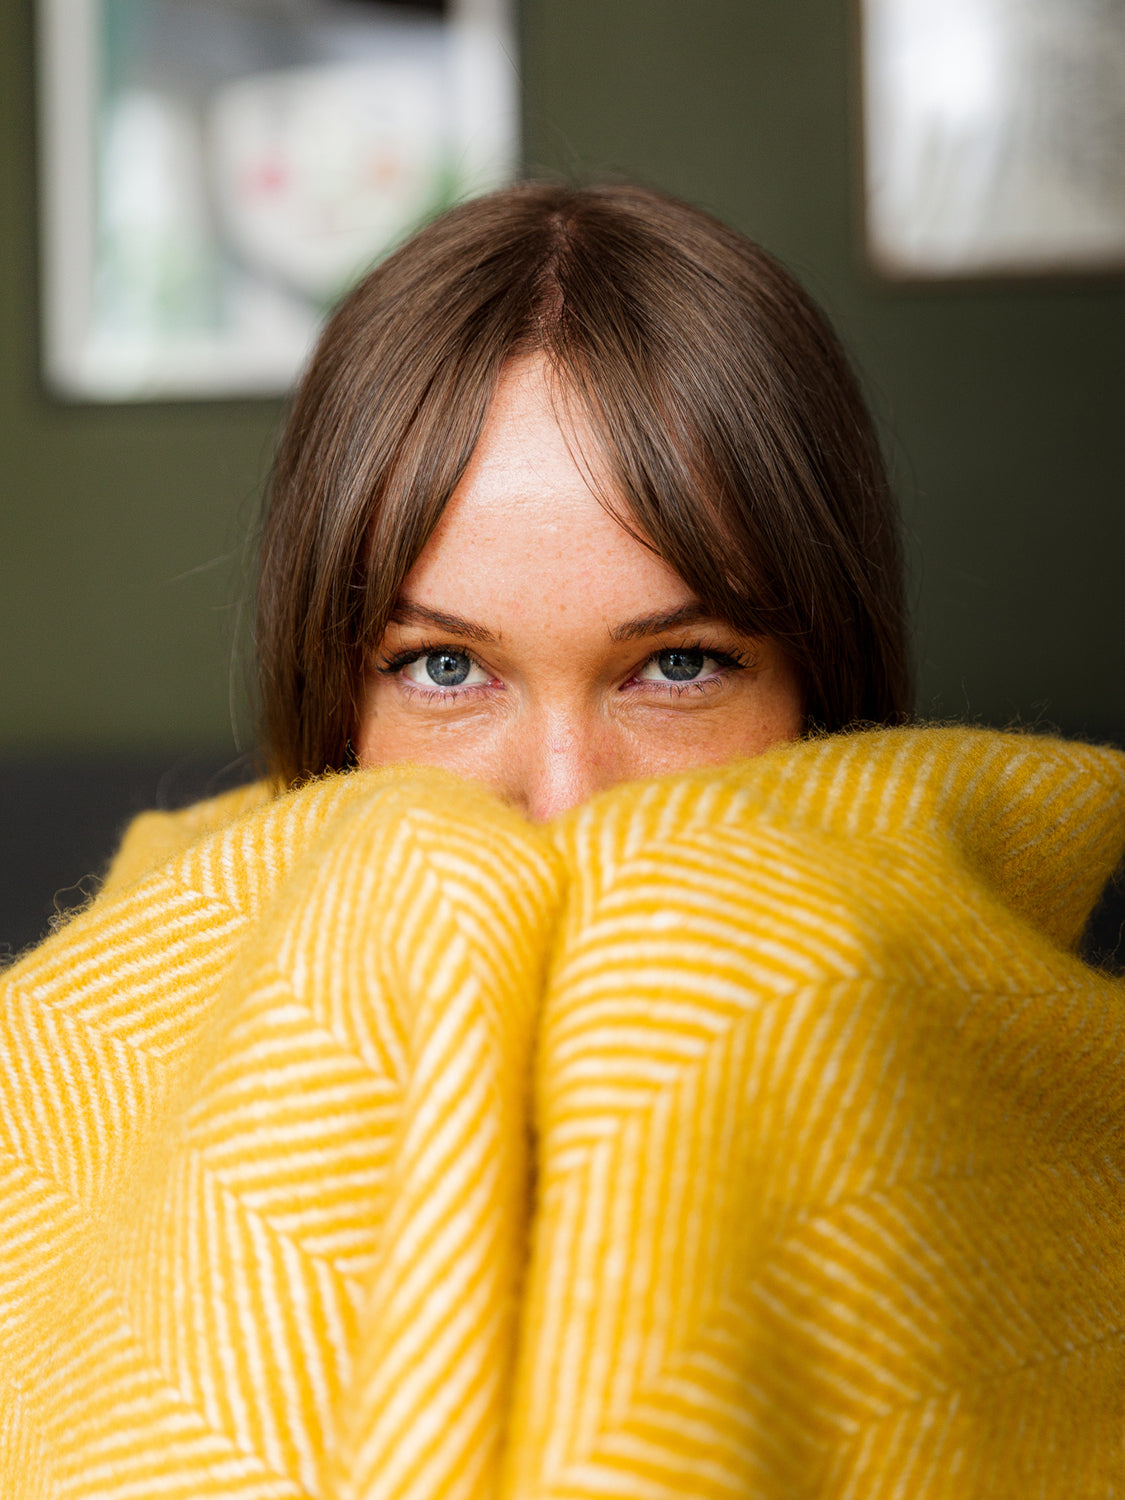 Upper half of a woman's face is peaking out of an XL yellow herringbone wool blanket